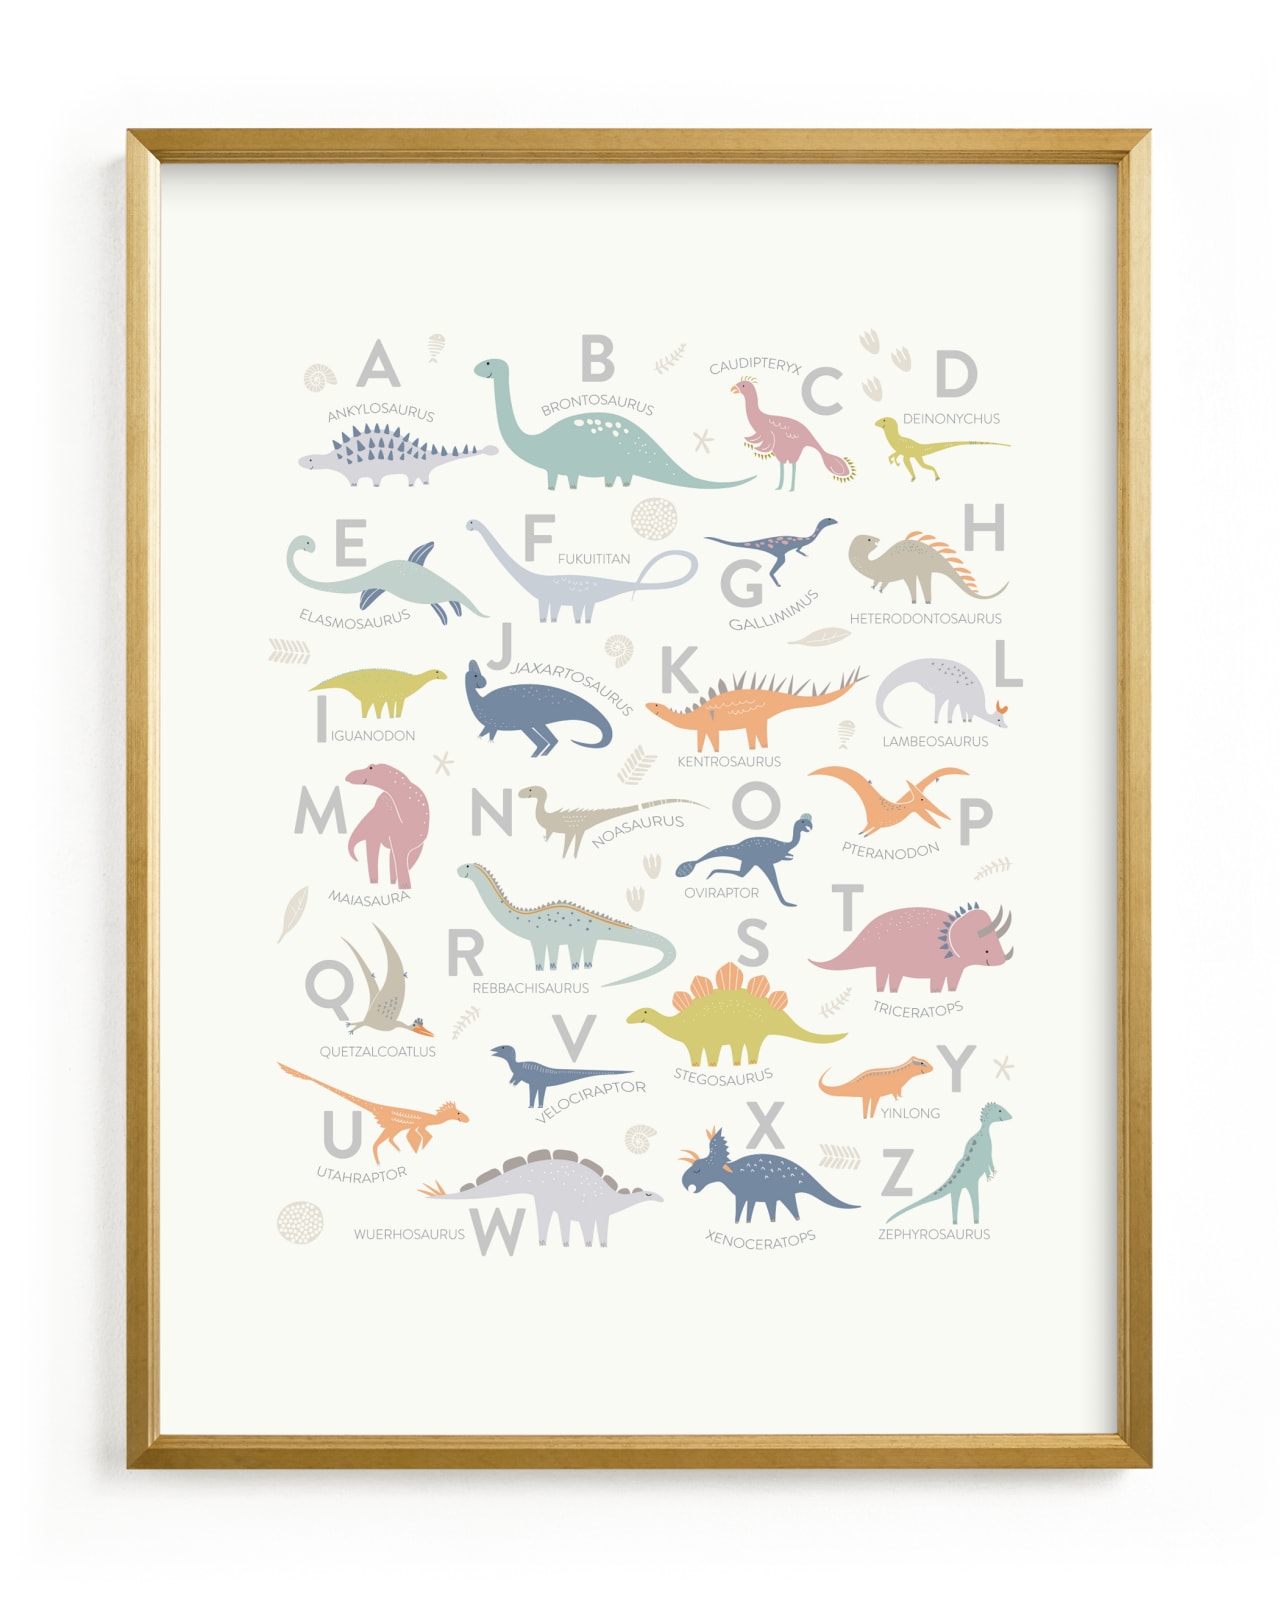 letters of the alphabet represented by dinosaurs